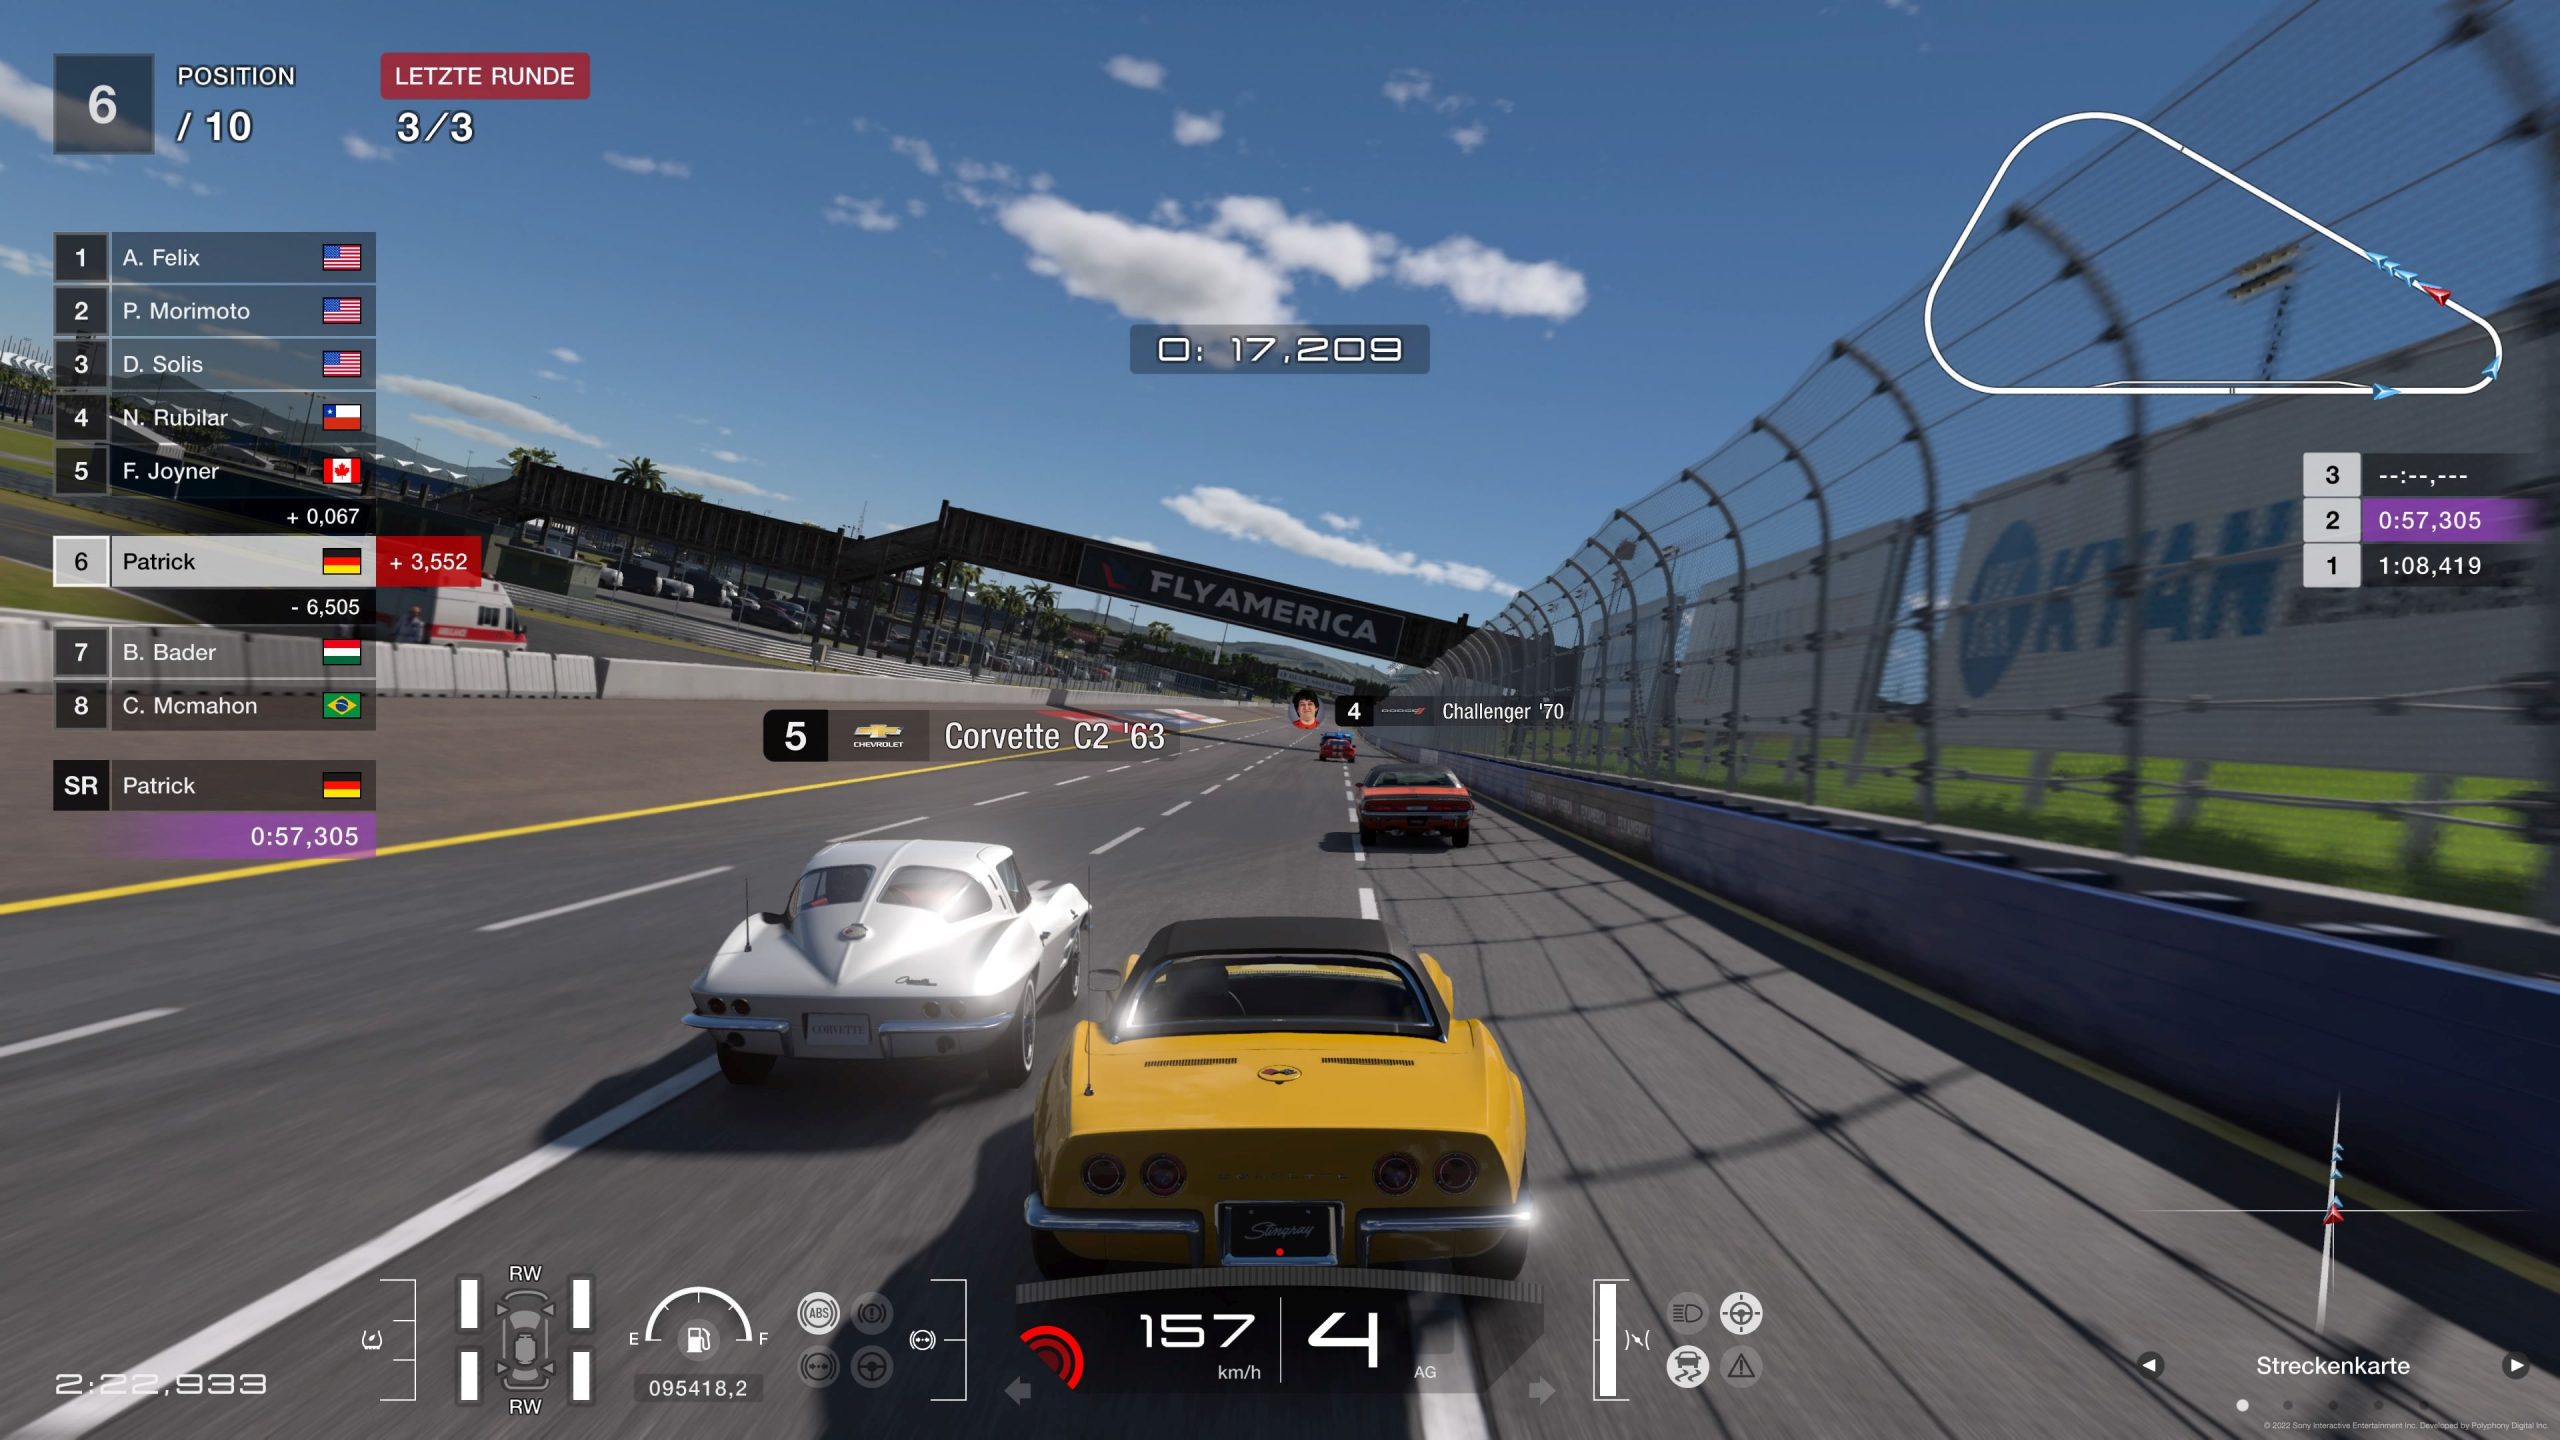 Despite Its Flaws, 'Gran Turismo 7' Is Still A Really Good Racing Game